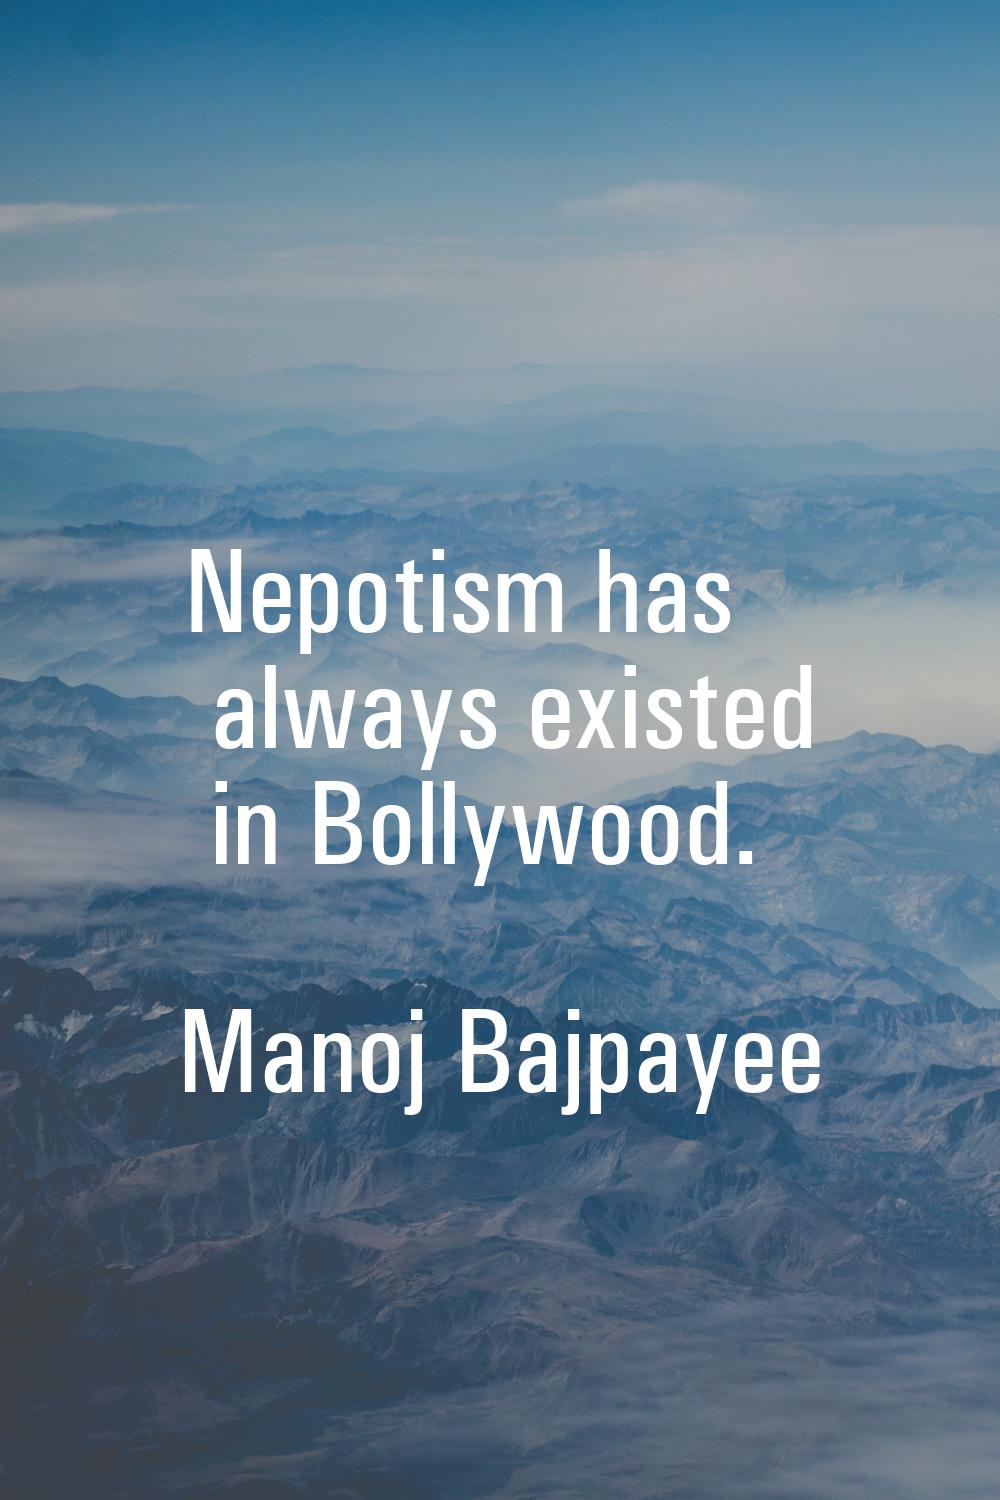 Nepotism has always existed in Bollywood.